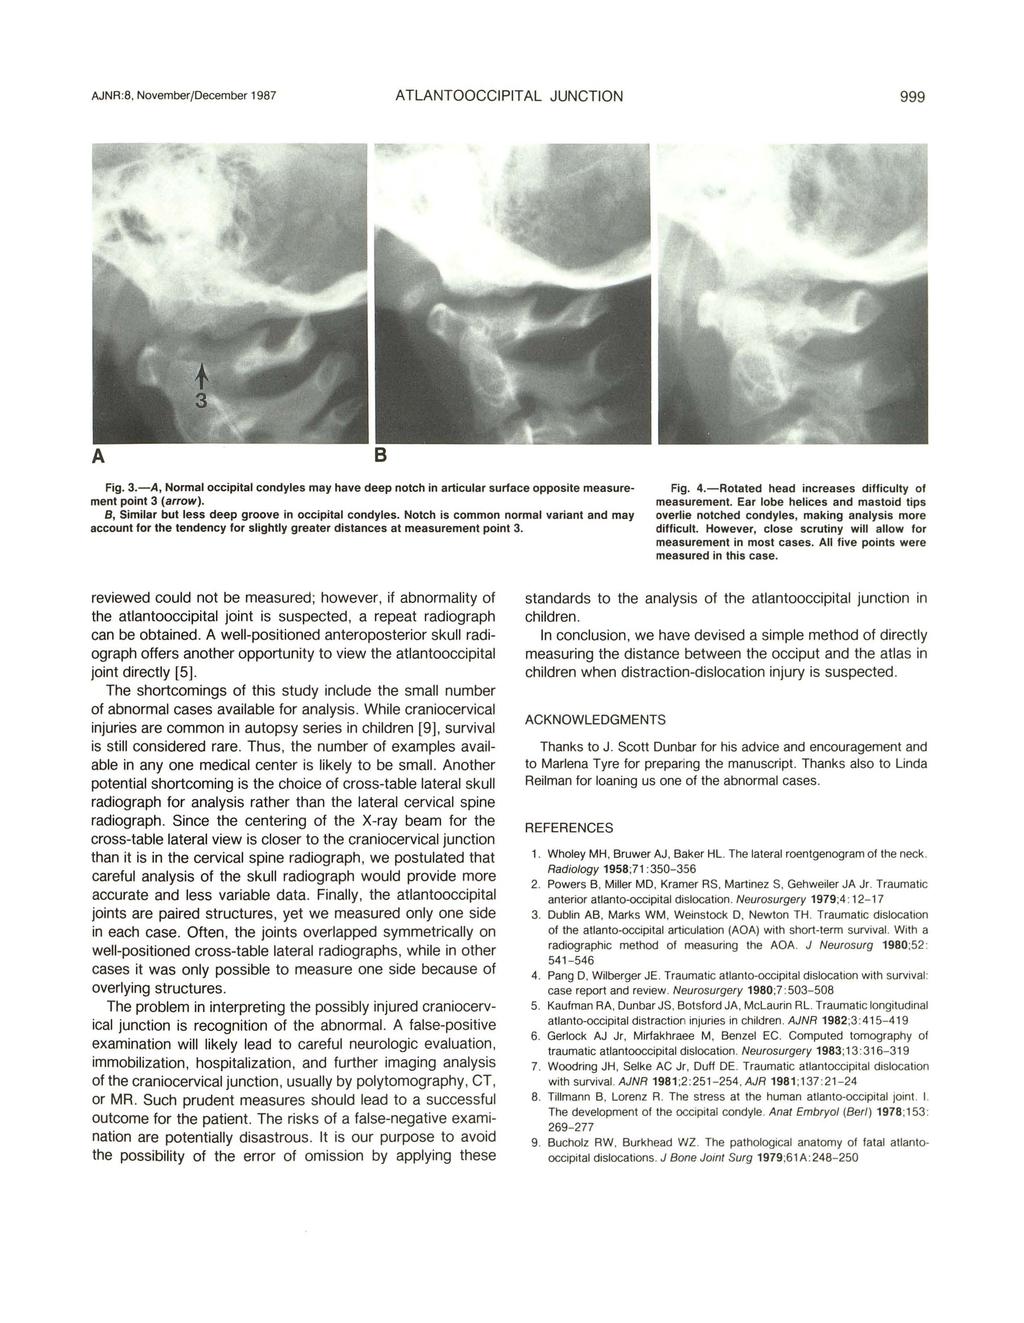 AJNR :8. November/December 1987 ATLANTOOCCIPITAL JUNCTION 999 Fig. 3.-A, Normal occipital condyles may have deep notch in articular surface opposite measurement point 3 (arrow).